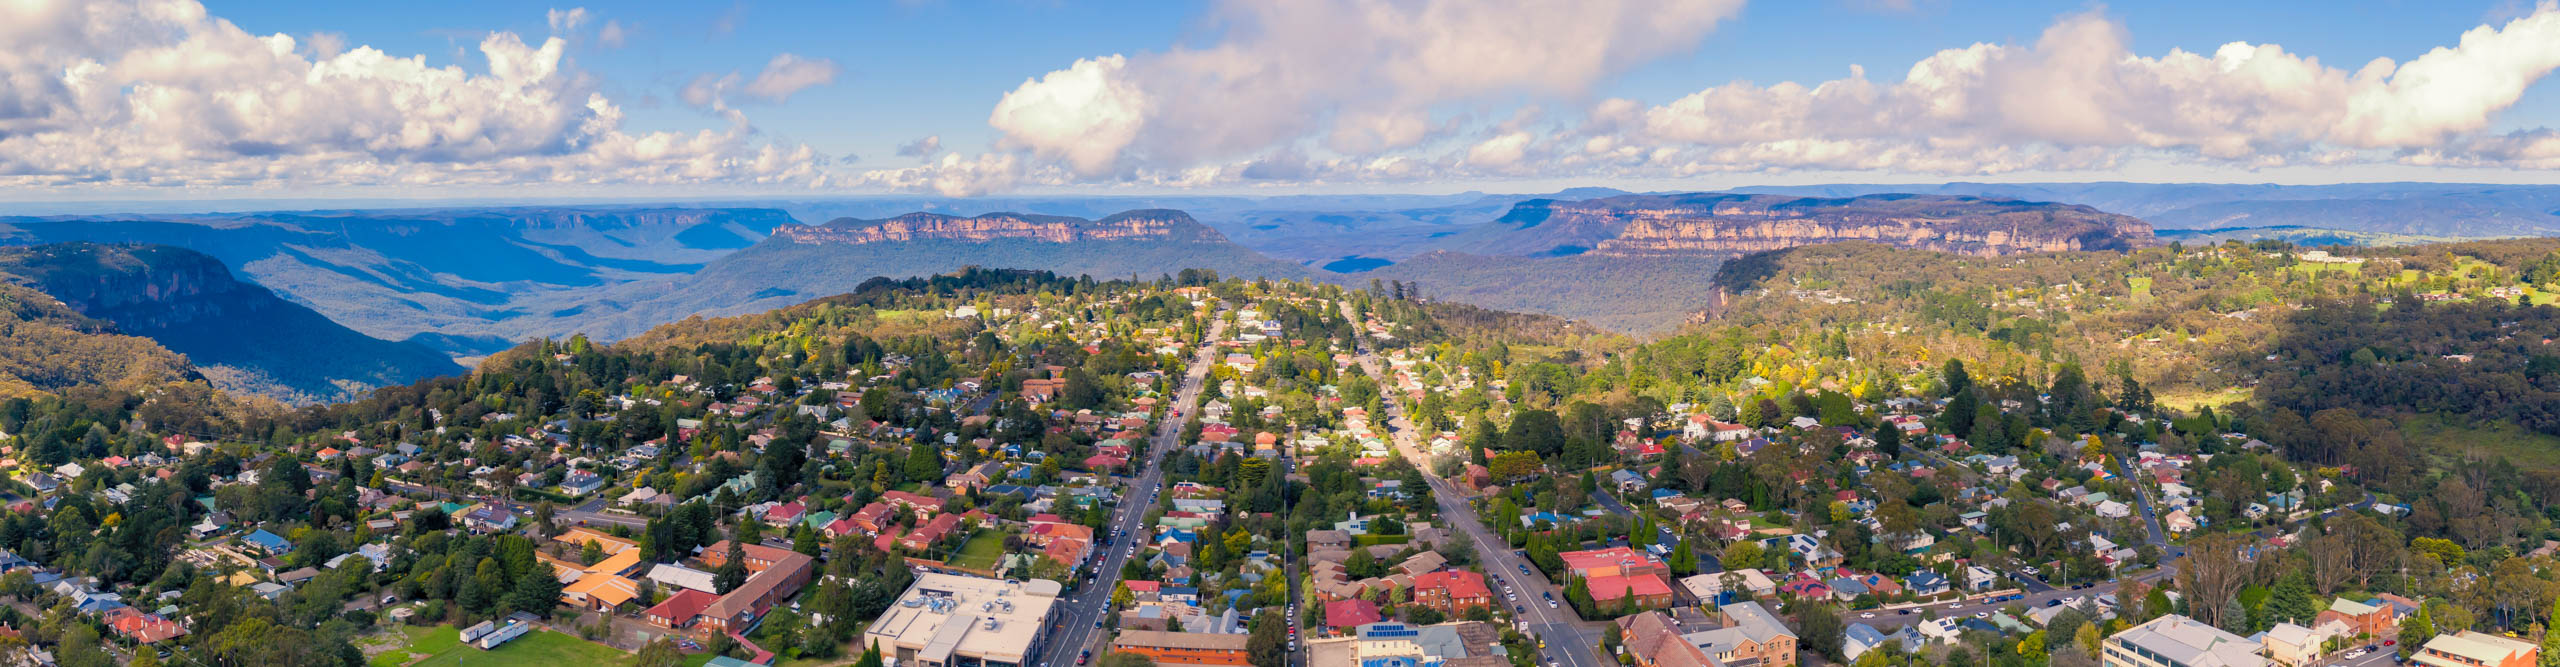 Aerial view of Katoomba as the sun rises with a few clouds in the sky, New South Wales, Australia